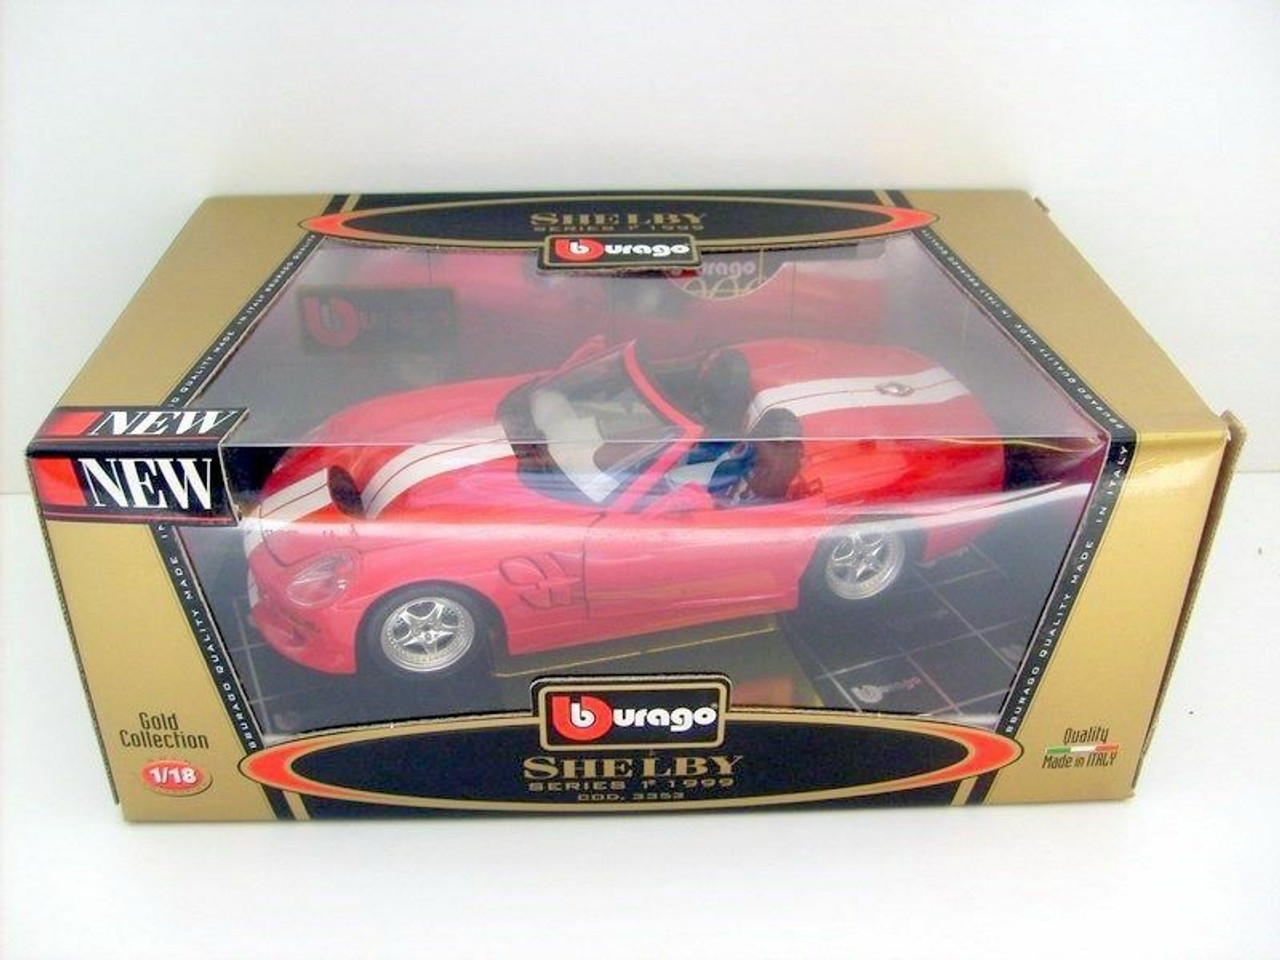 1/18 Bburago Gold Collection 1999 Shelby Series 1 (Red with White Stripes) Diecast Car Model